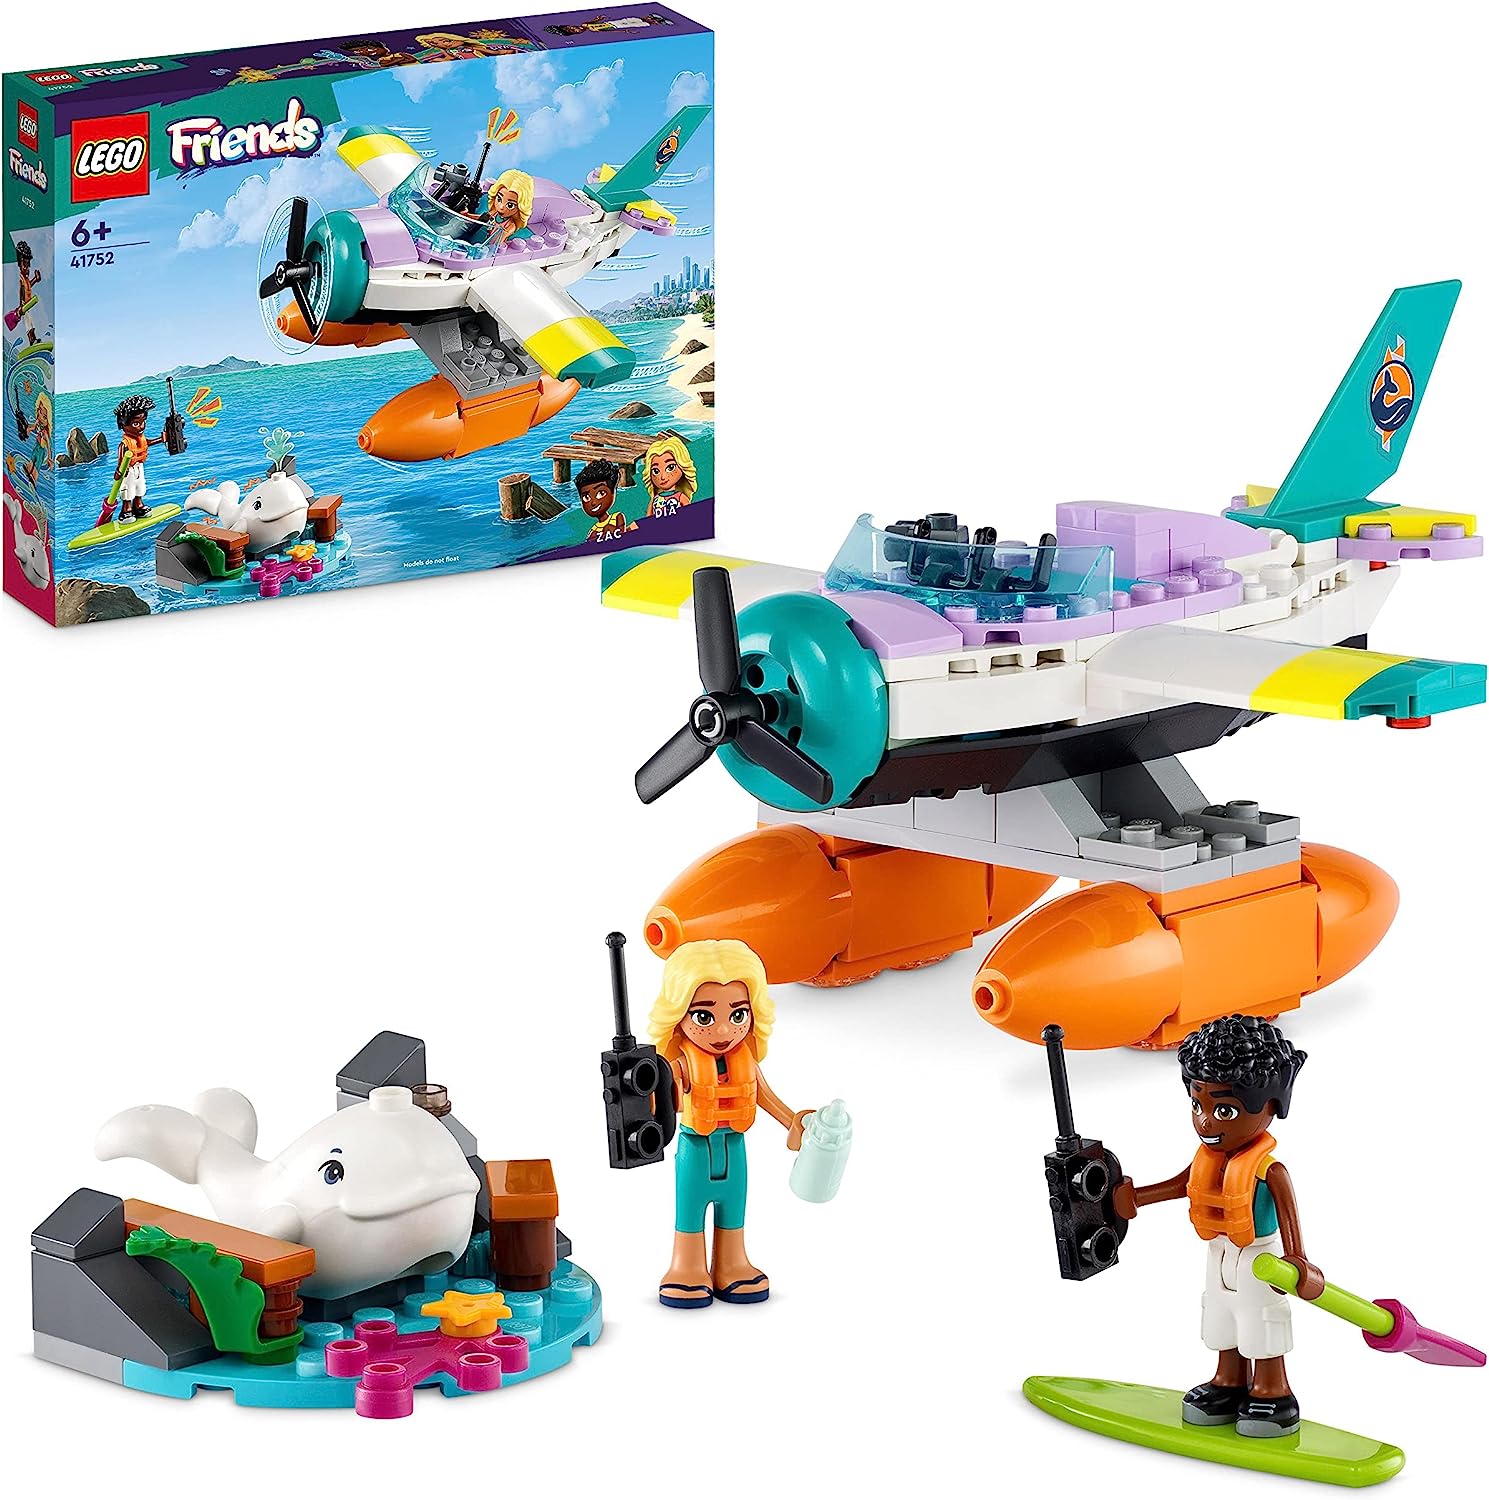 LEGO 41752 Friends Sea Rescue Plans, Aeroplane Toy with Whale Figure and Mini Dolls, Animal Care Gift for Birthdays, For Girls, Boys and Children from 6 Years